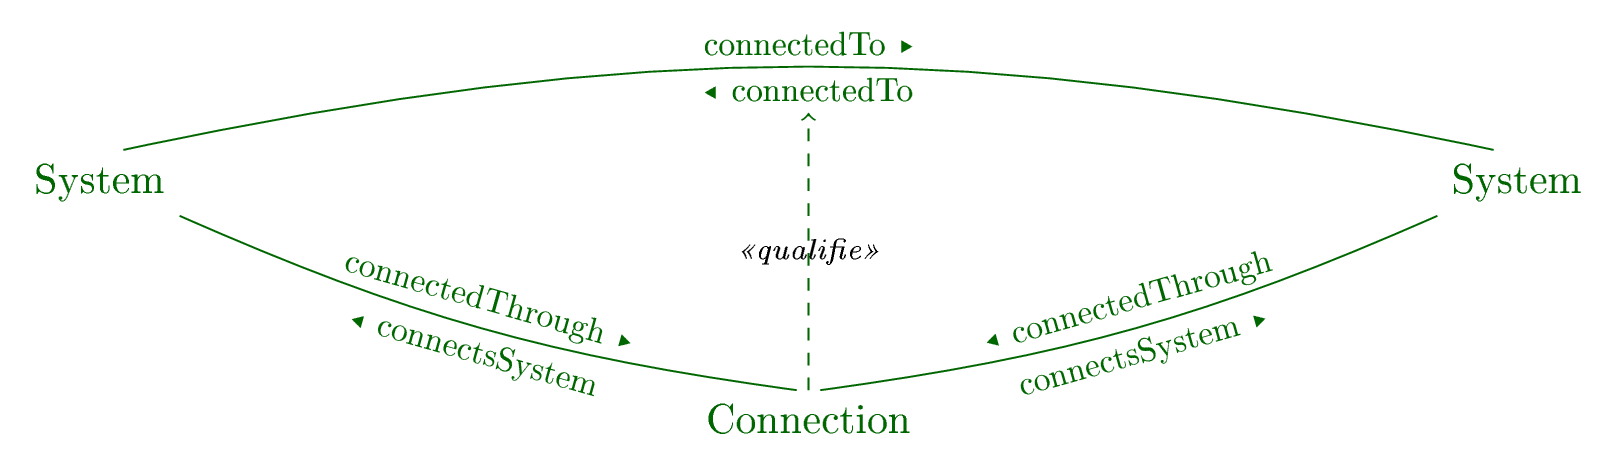 Connections of systems